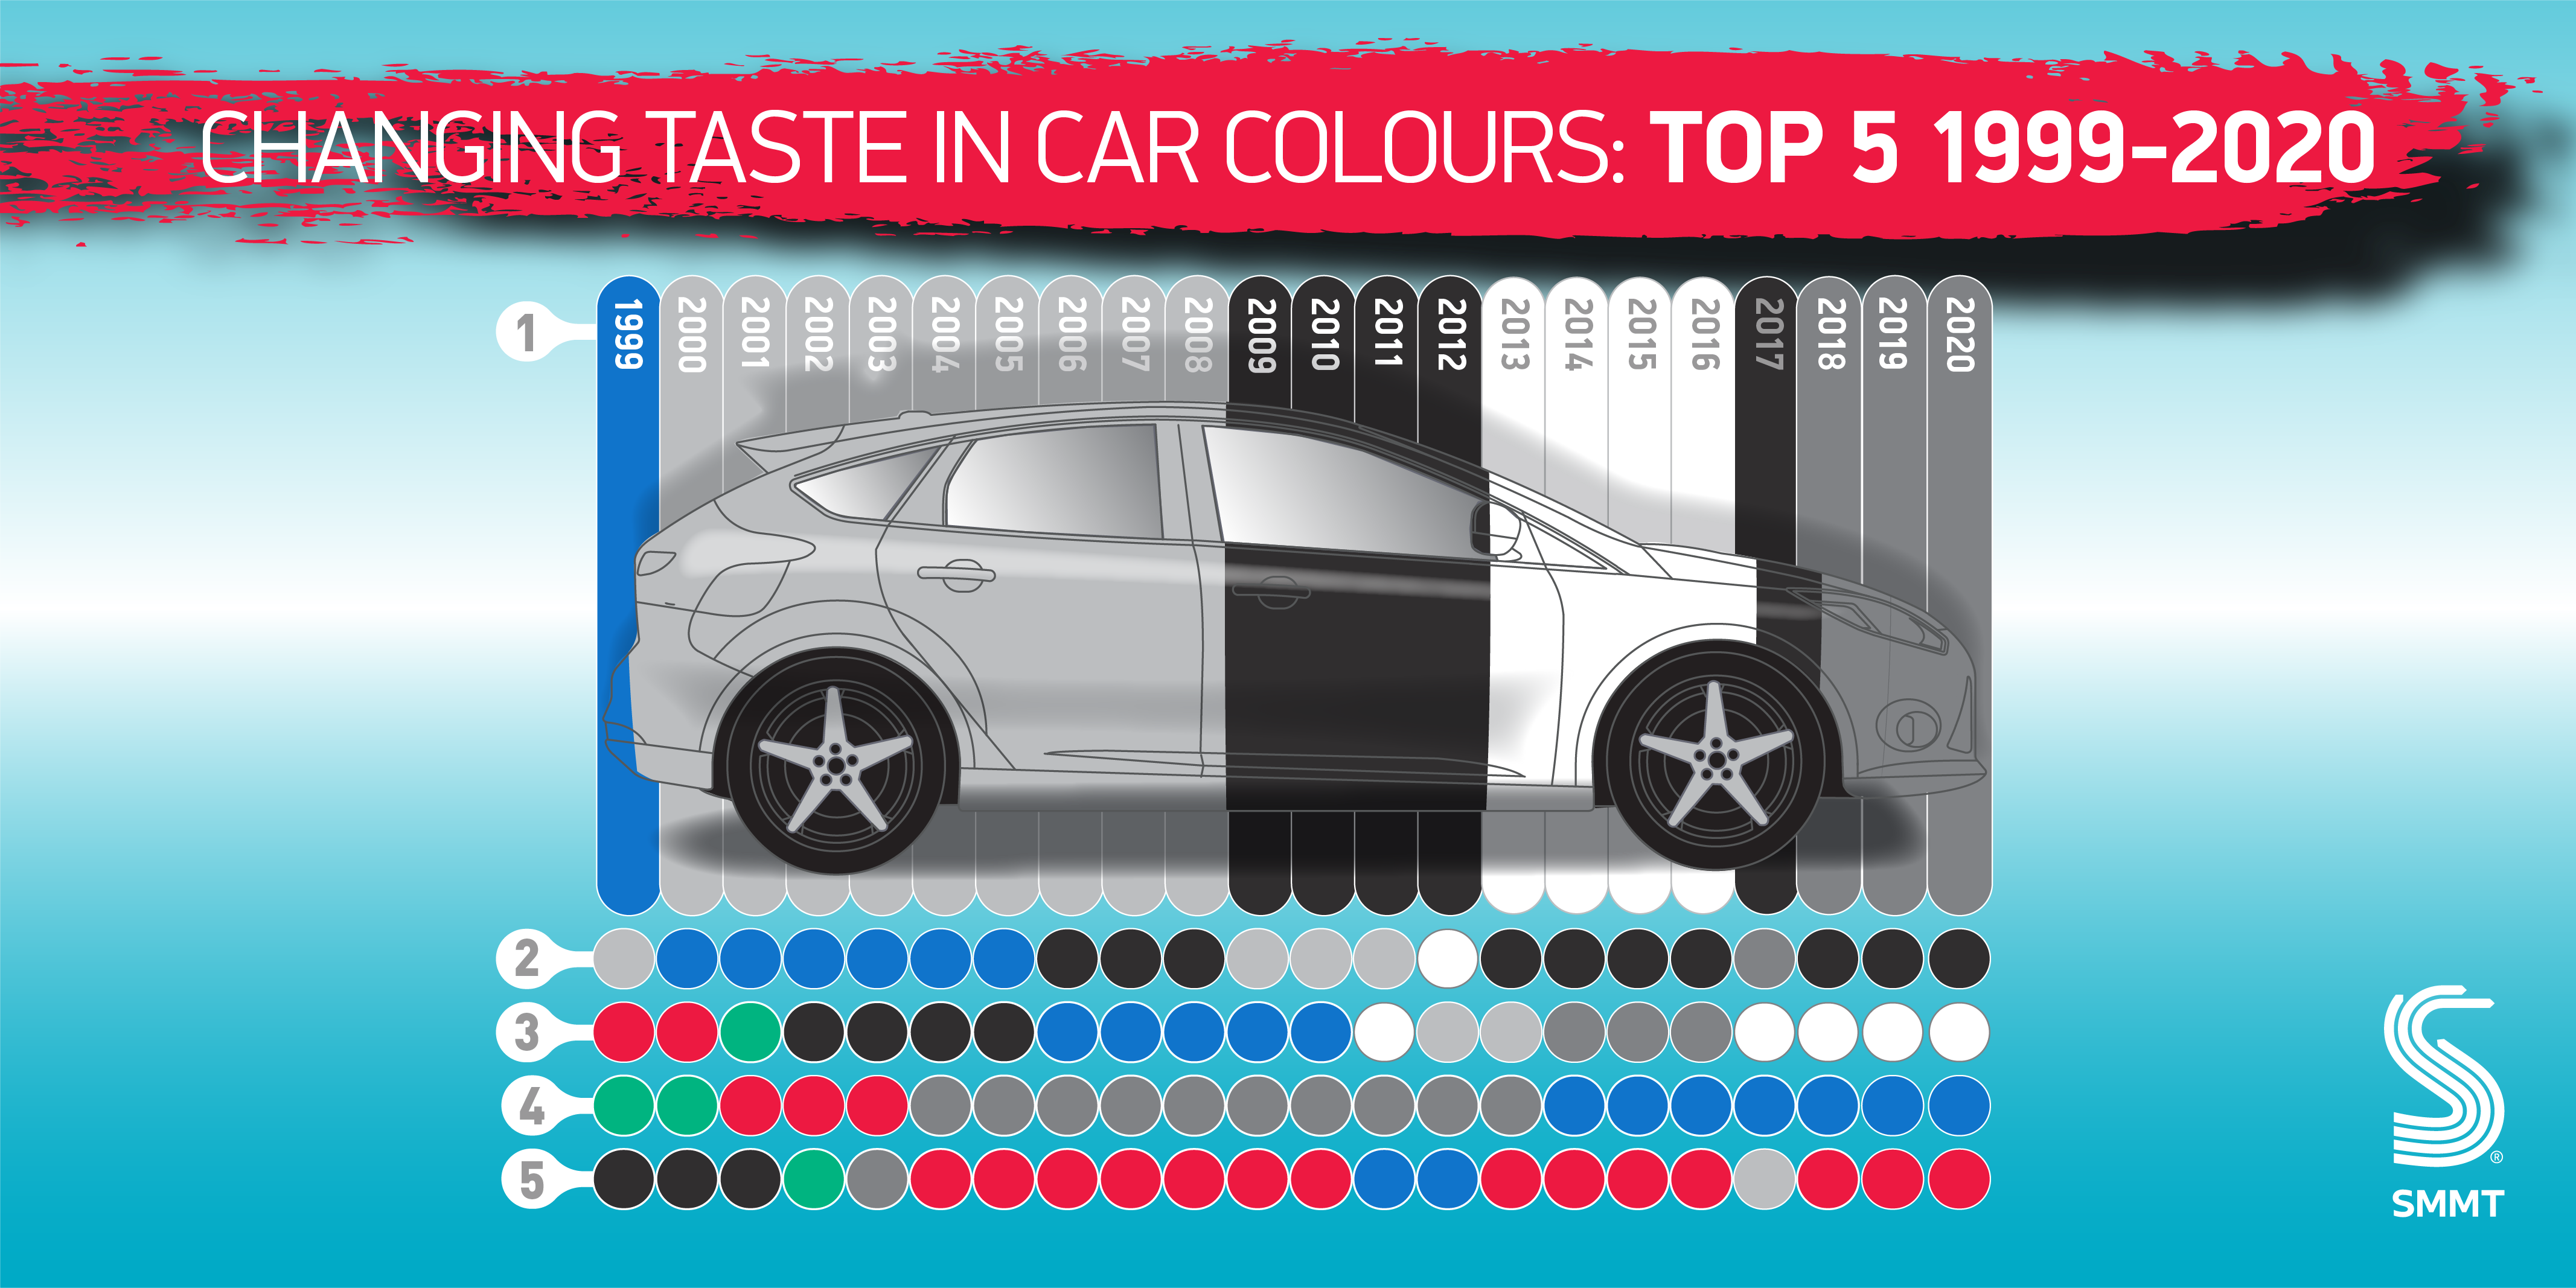 Most popular car colours in the UK 1999-2020